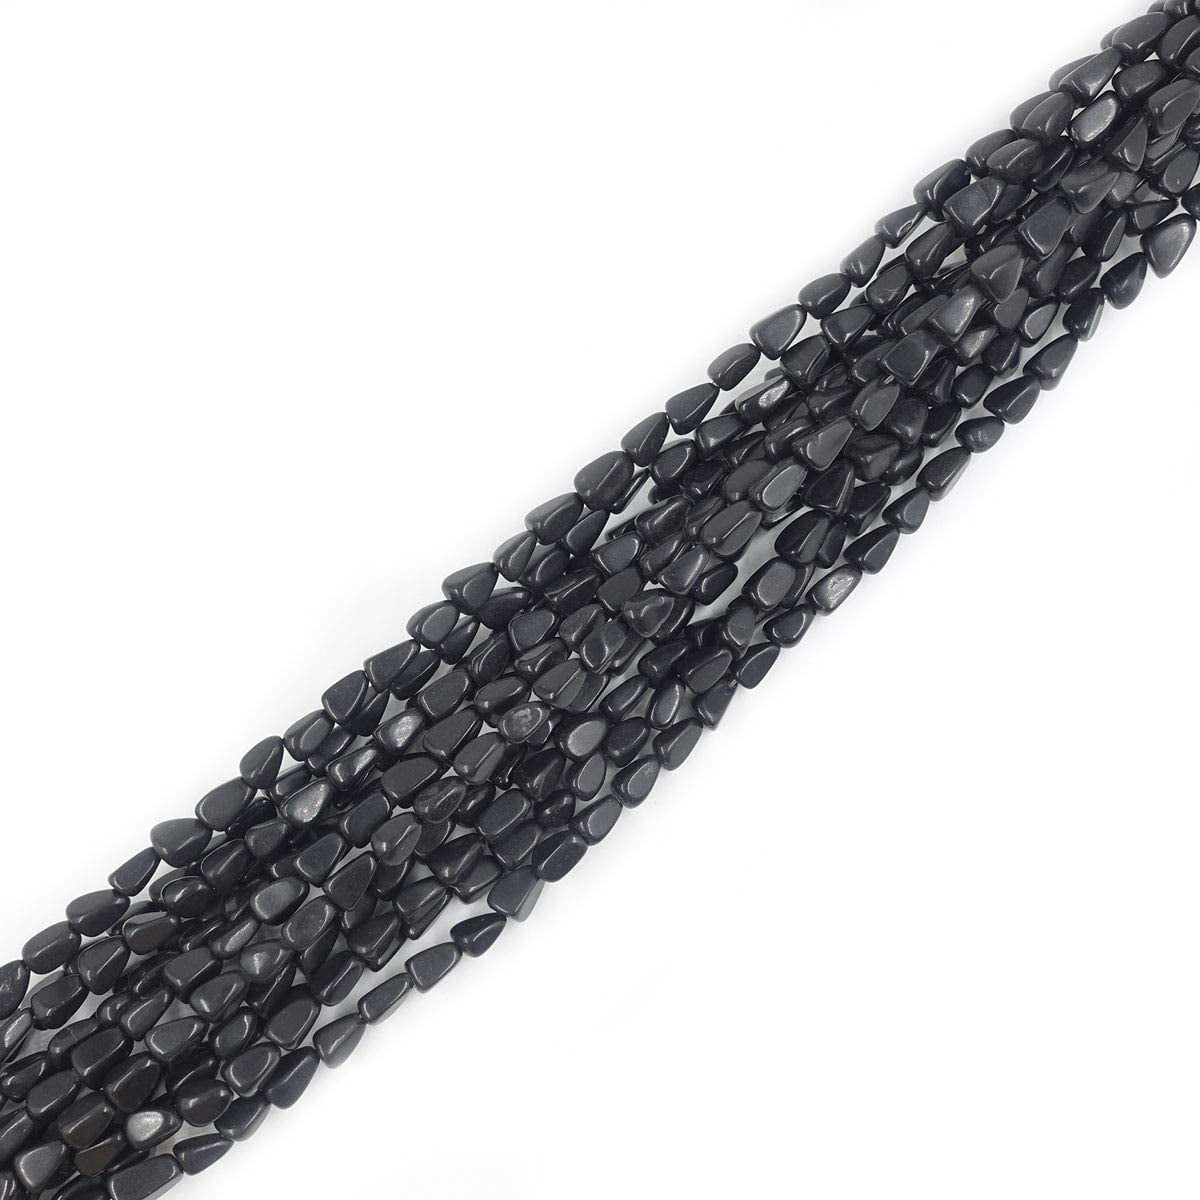 10mm Natural Matte Cube Black Agate Gemstone Loose Beads for Jewelry Making 15" 